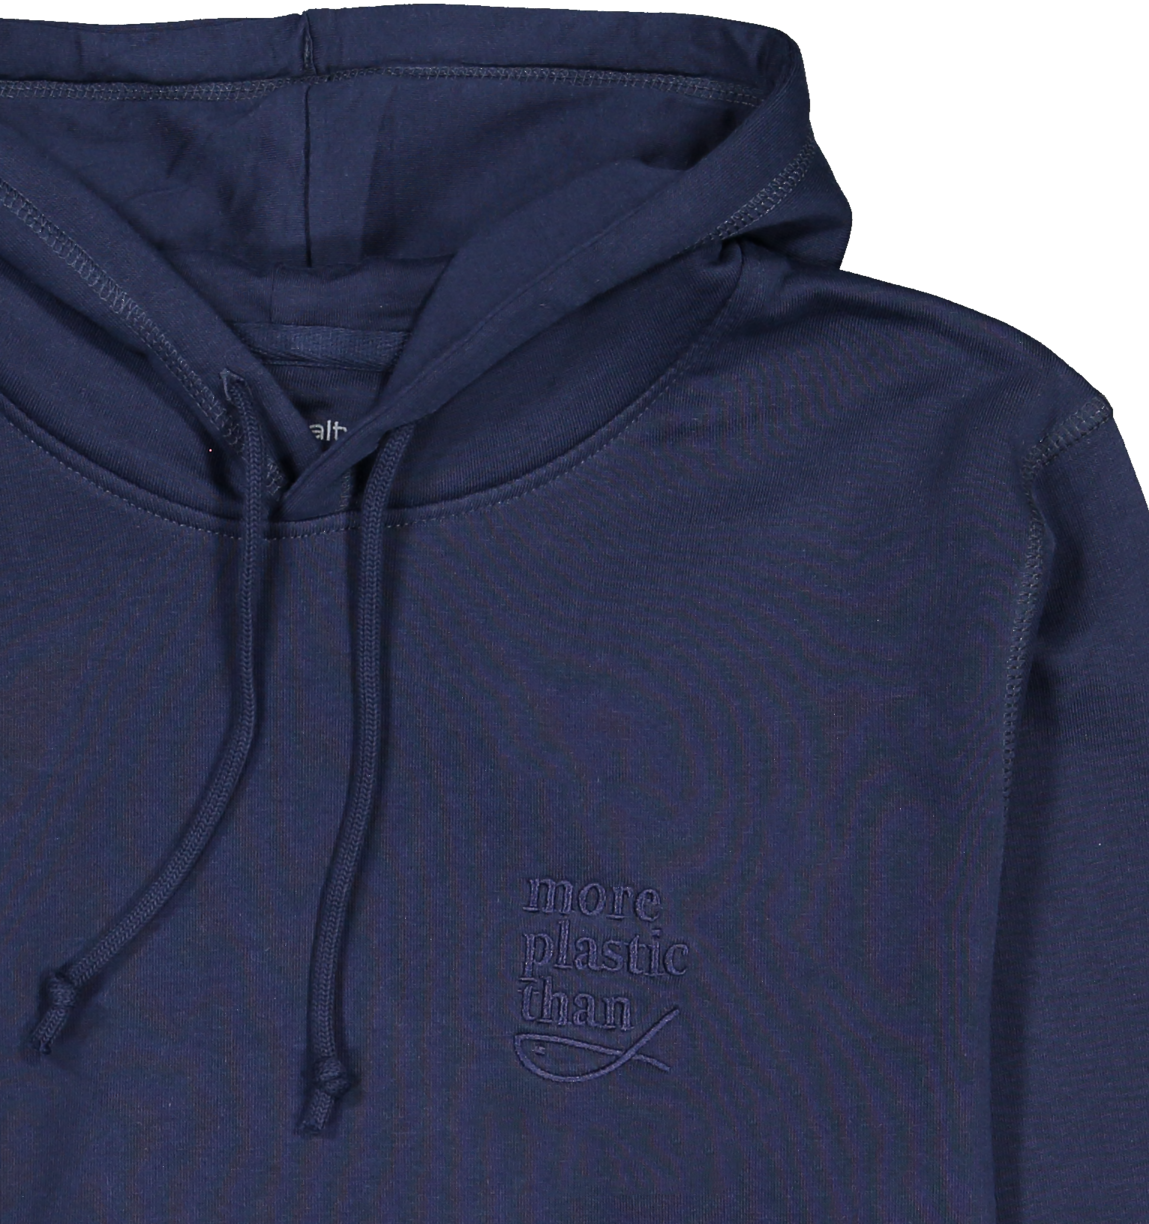 Navy Blue Hoodie with fish Organic Cotton